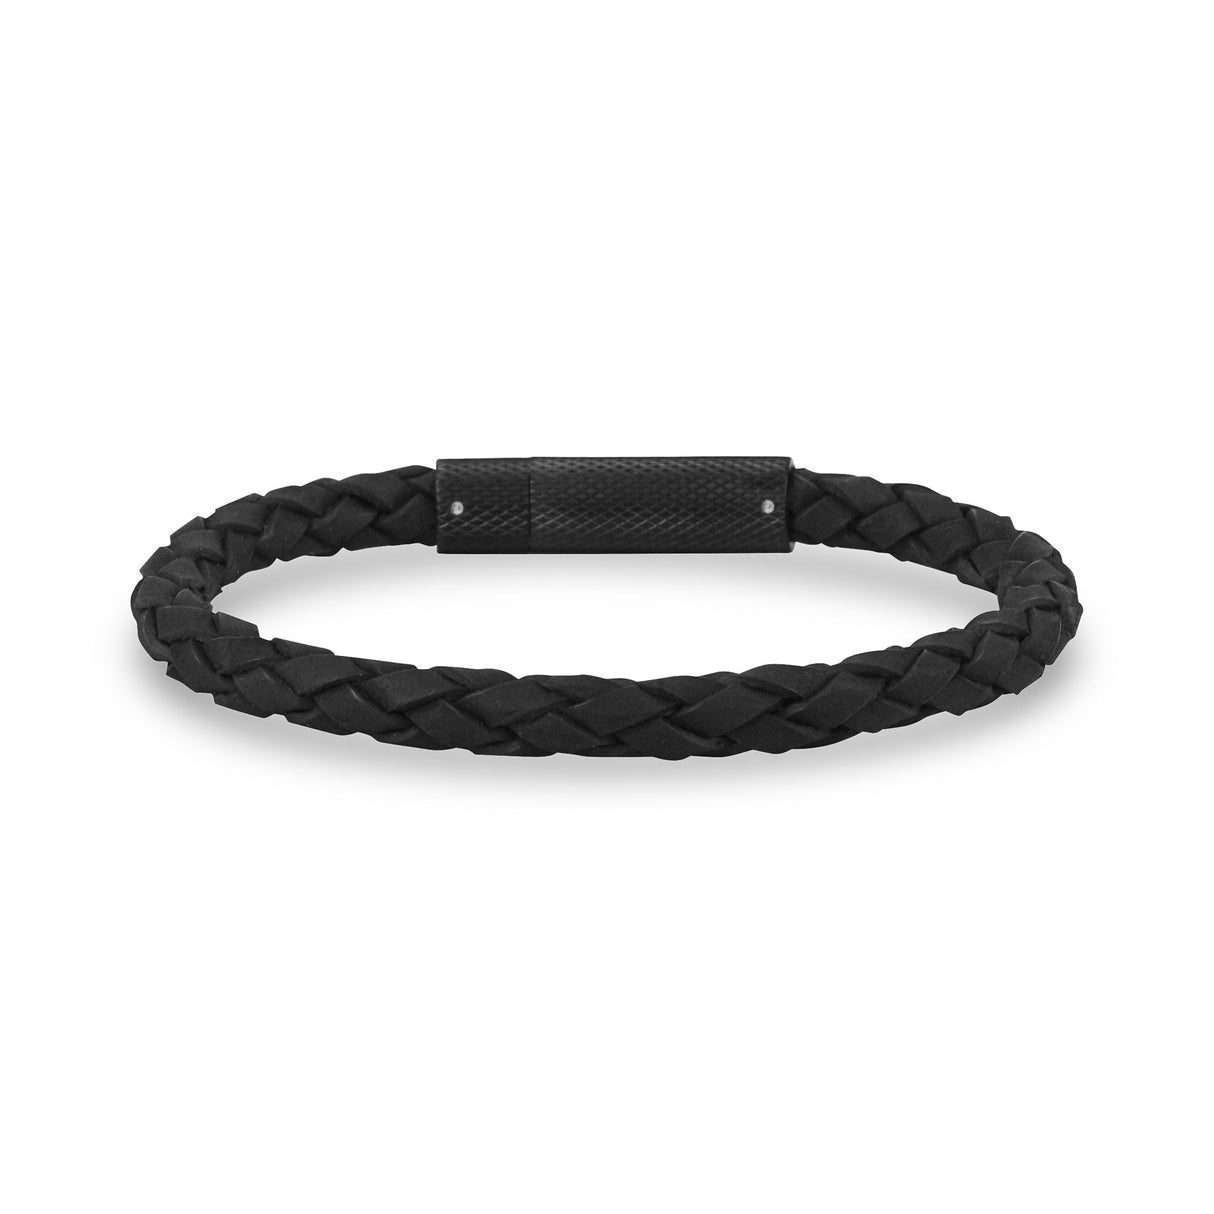 6mm matte Black stainless steel clasp Black and brown leather bracelet